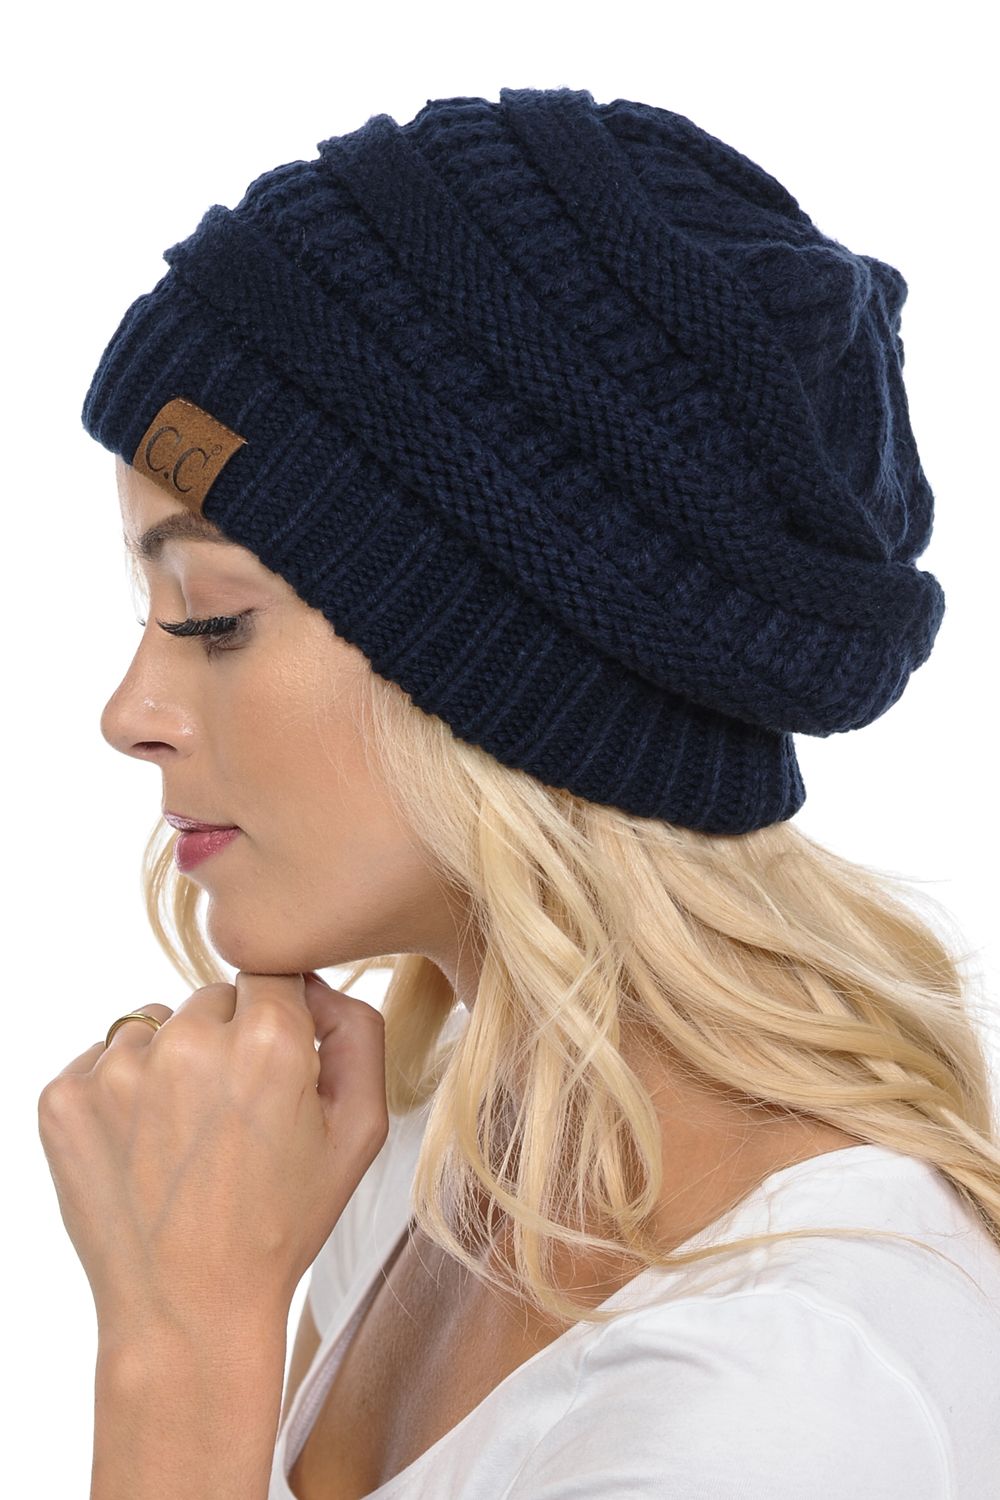 C.C Hat-20A Slouchy Thick Warm Cap Hat Skully Color Cable Knit Beanie Navy - image 1 of 2